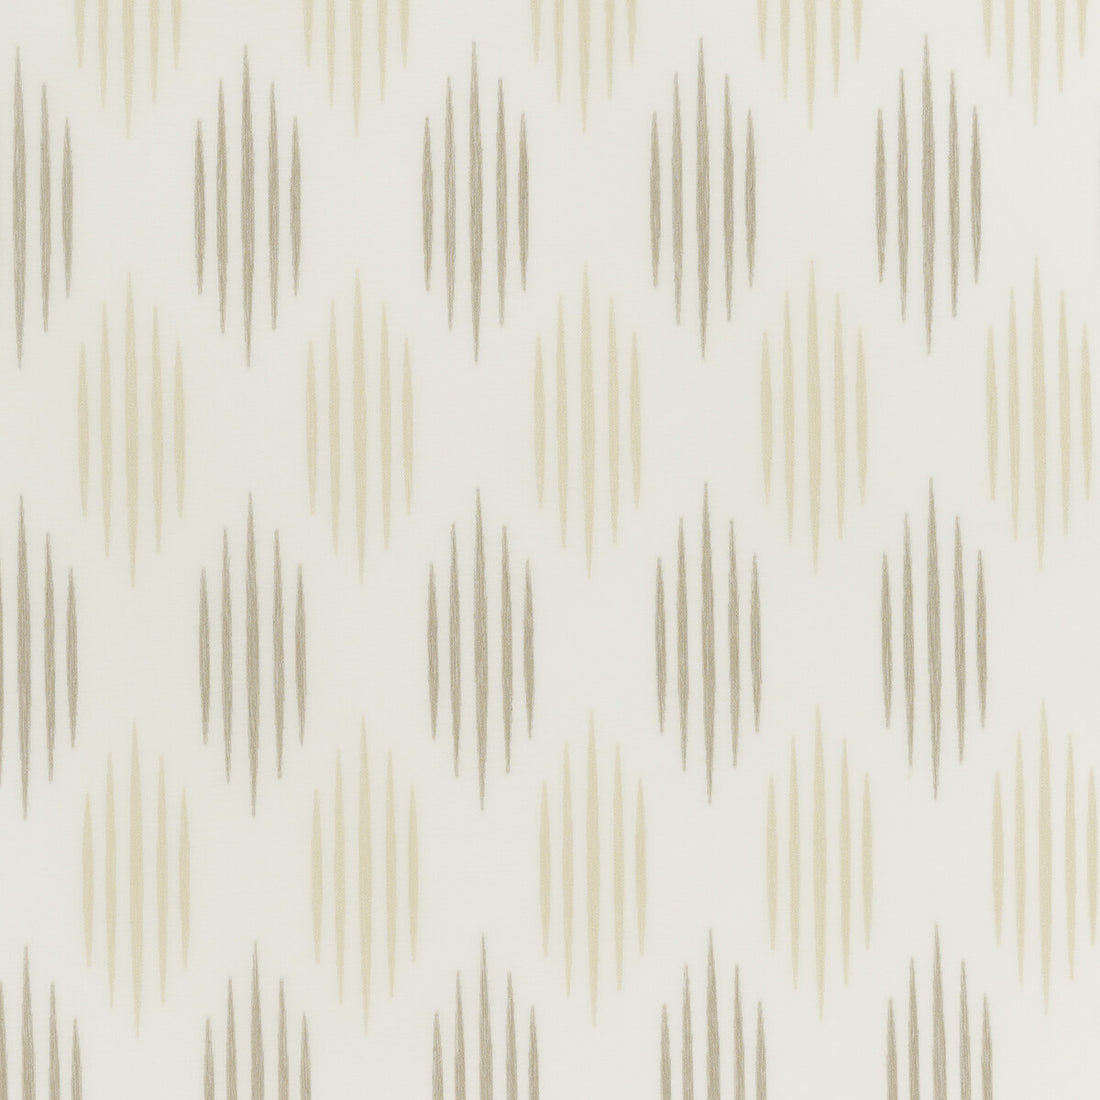 Windward Stripe fabric in polar color - pattern ED95006.100.0 - by Threads in the Meridian collection